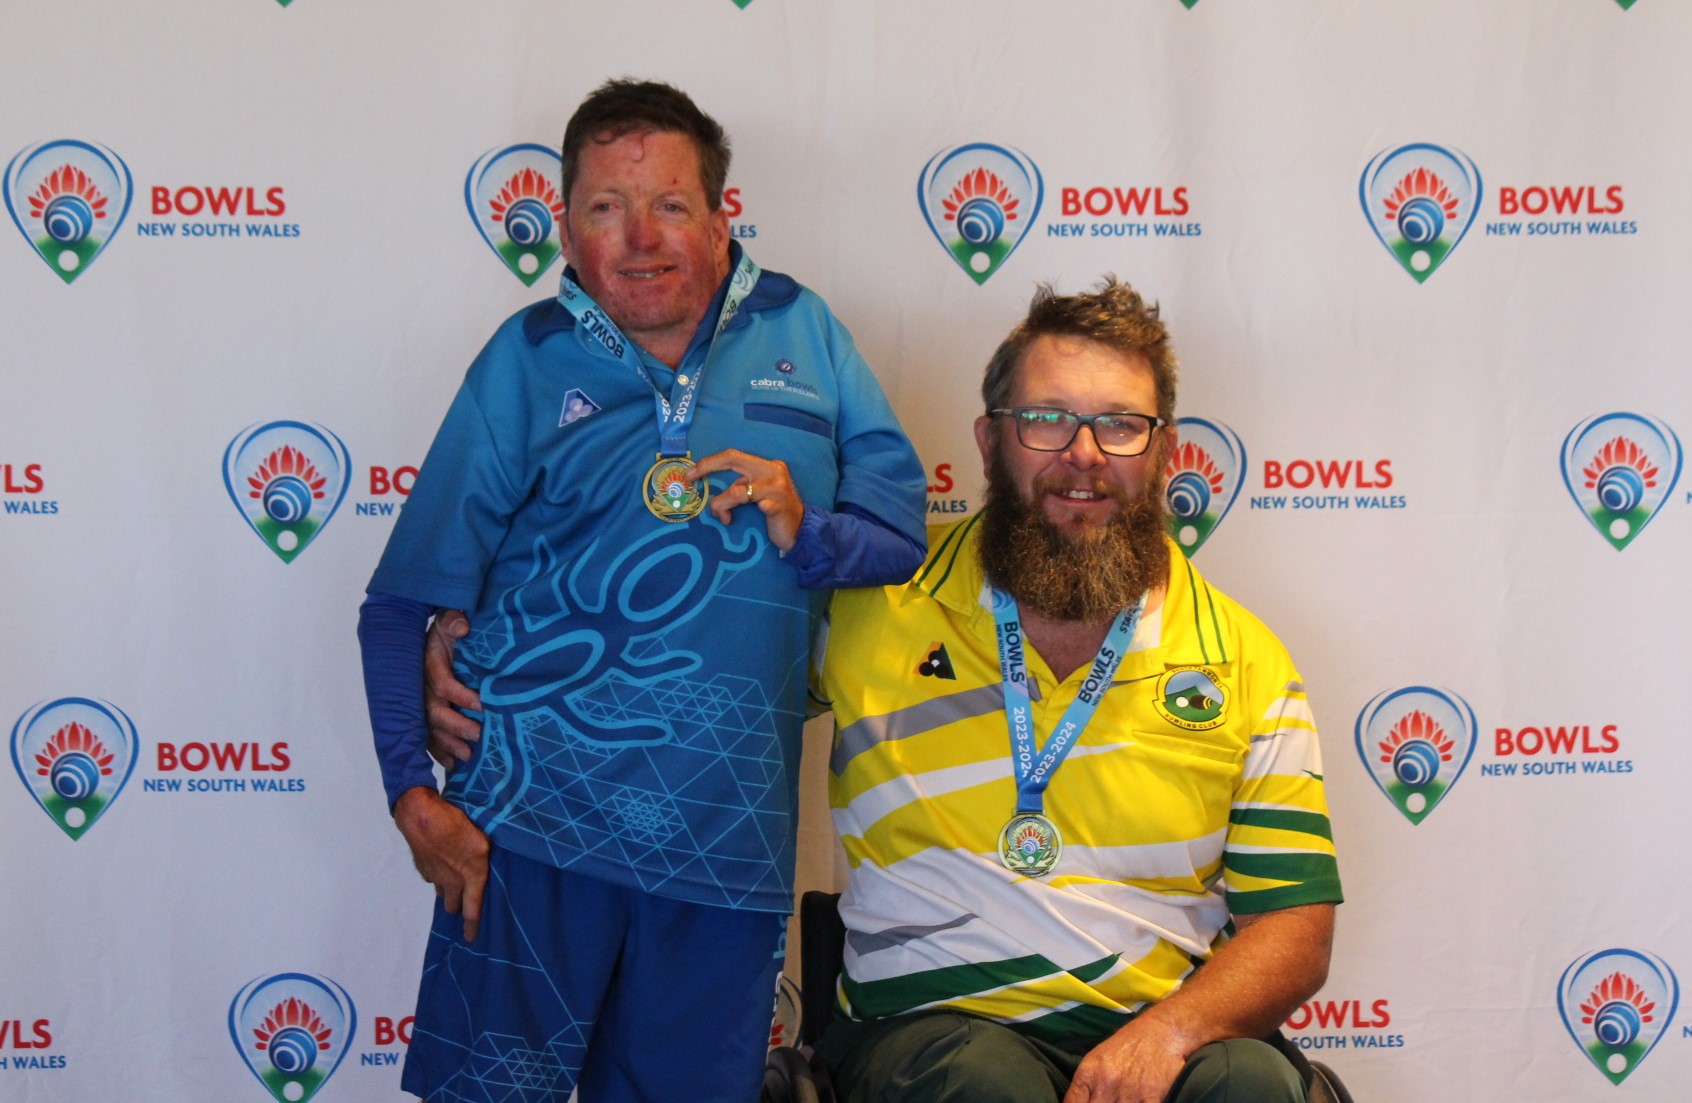 James Reynolds and Desmond Cross - Multi-disability Pairs State Champions